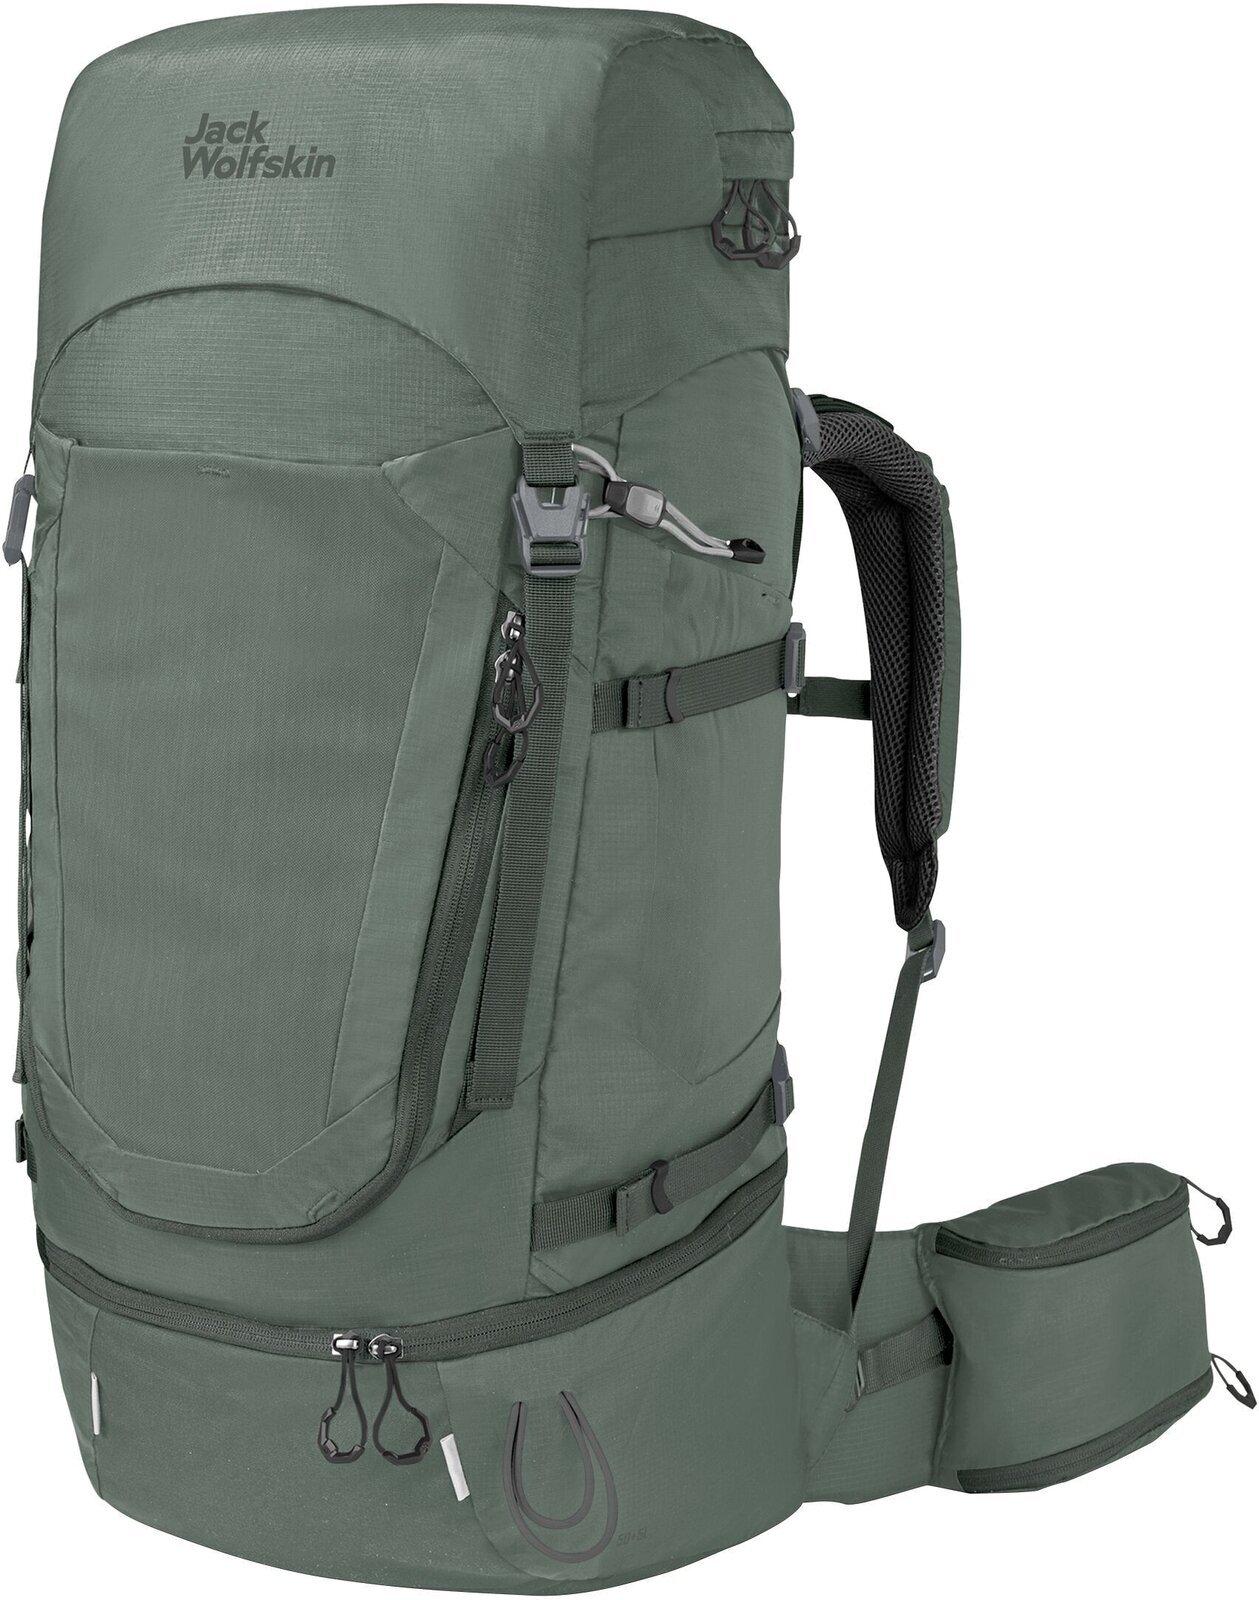 Outdoor Backpack Jack Wolfskin Highland Trail 50+5 Women Hedge Green XS-M Outdoor Backpack